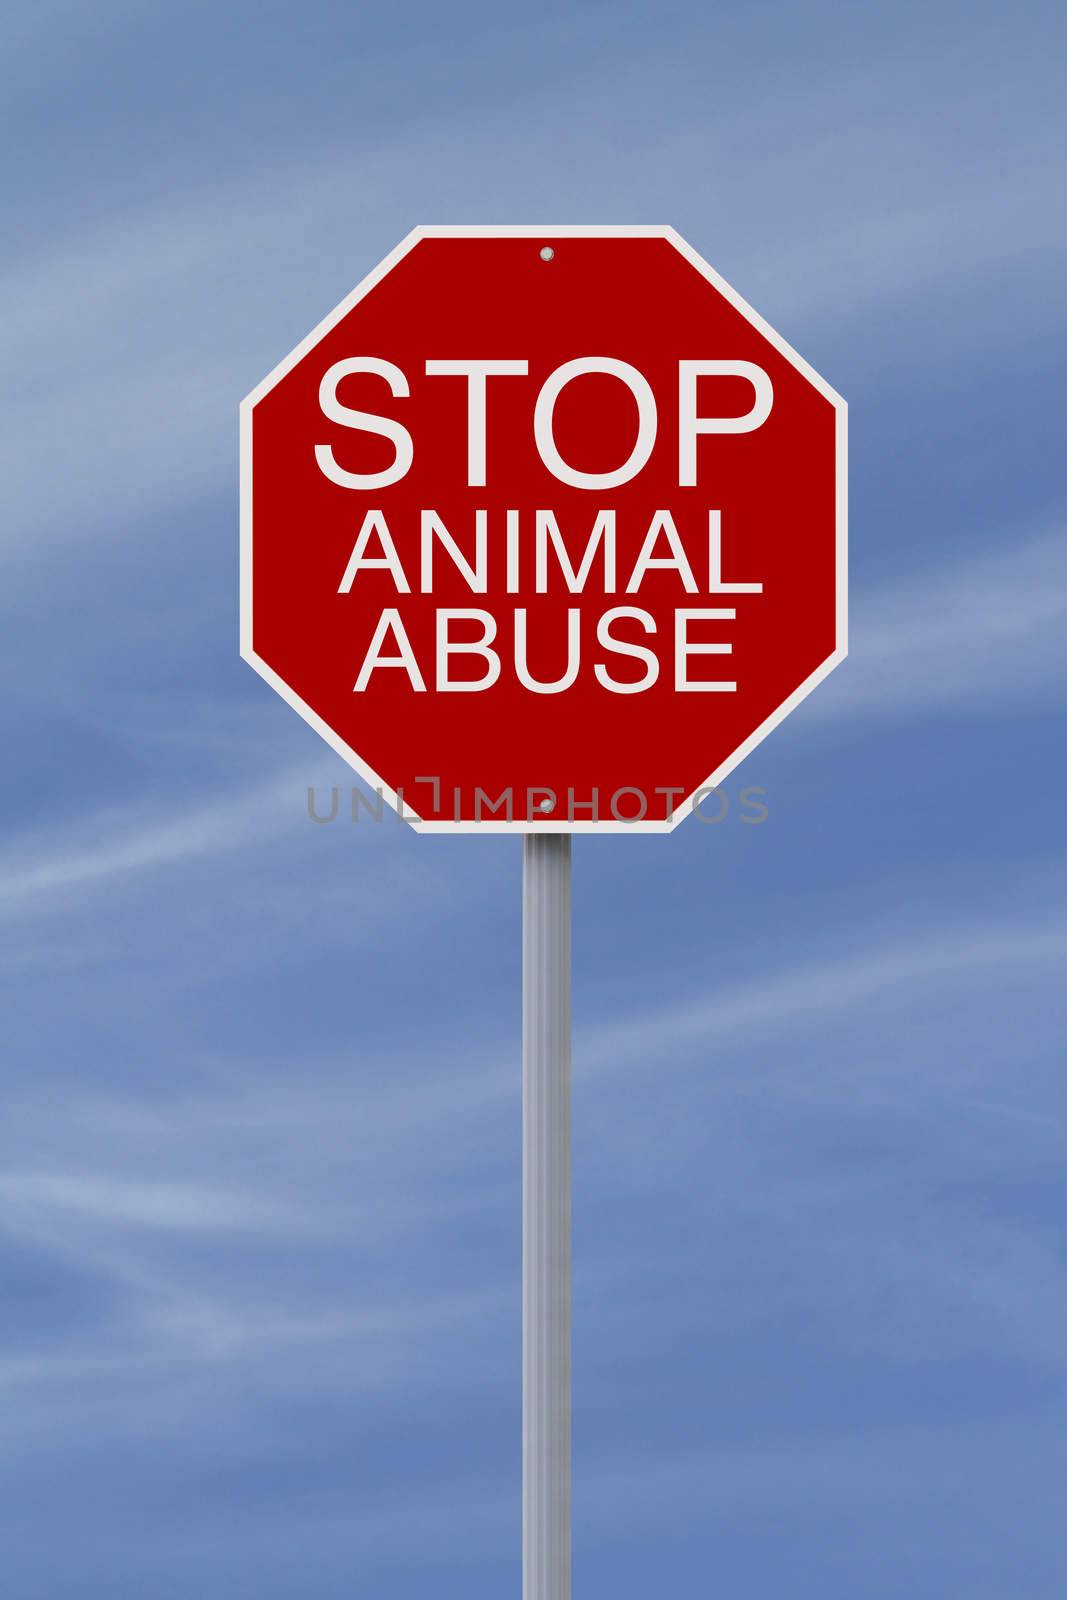 Stop Animal Abuse by rnl